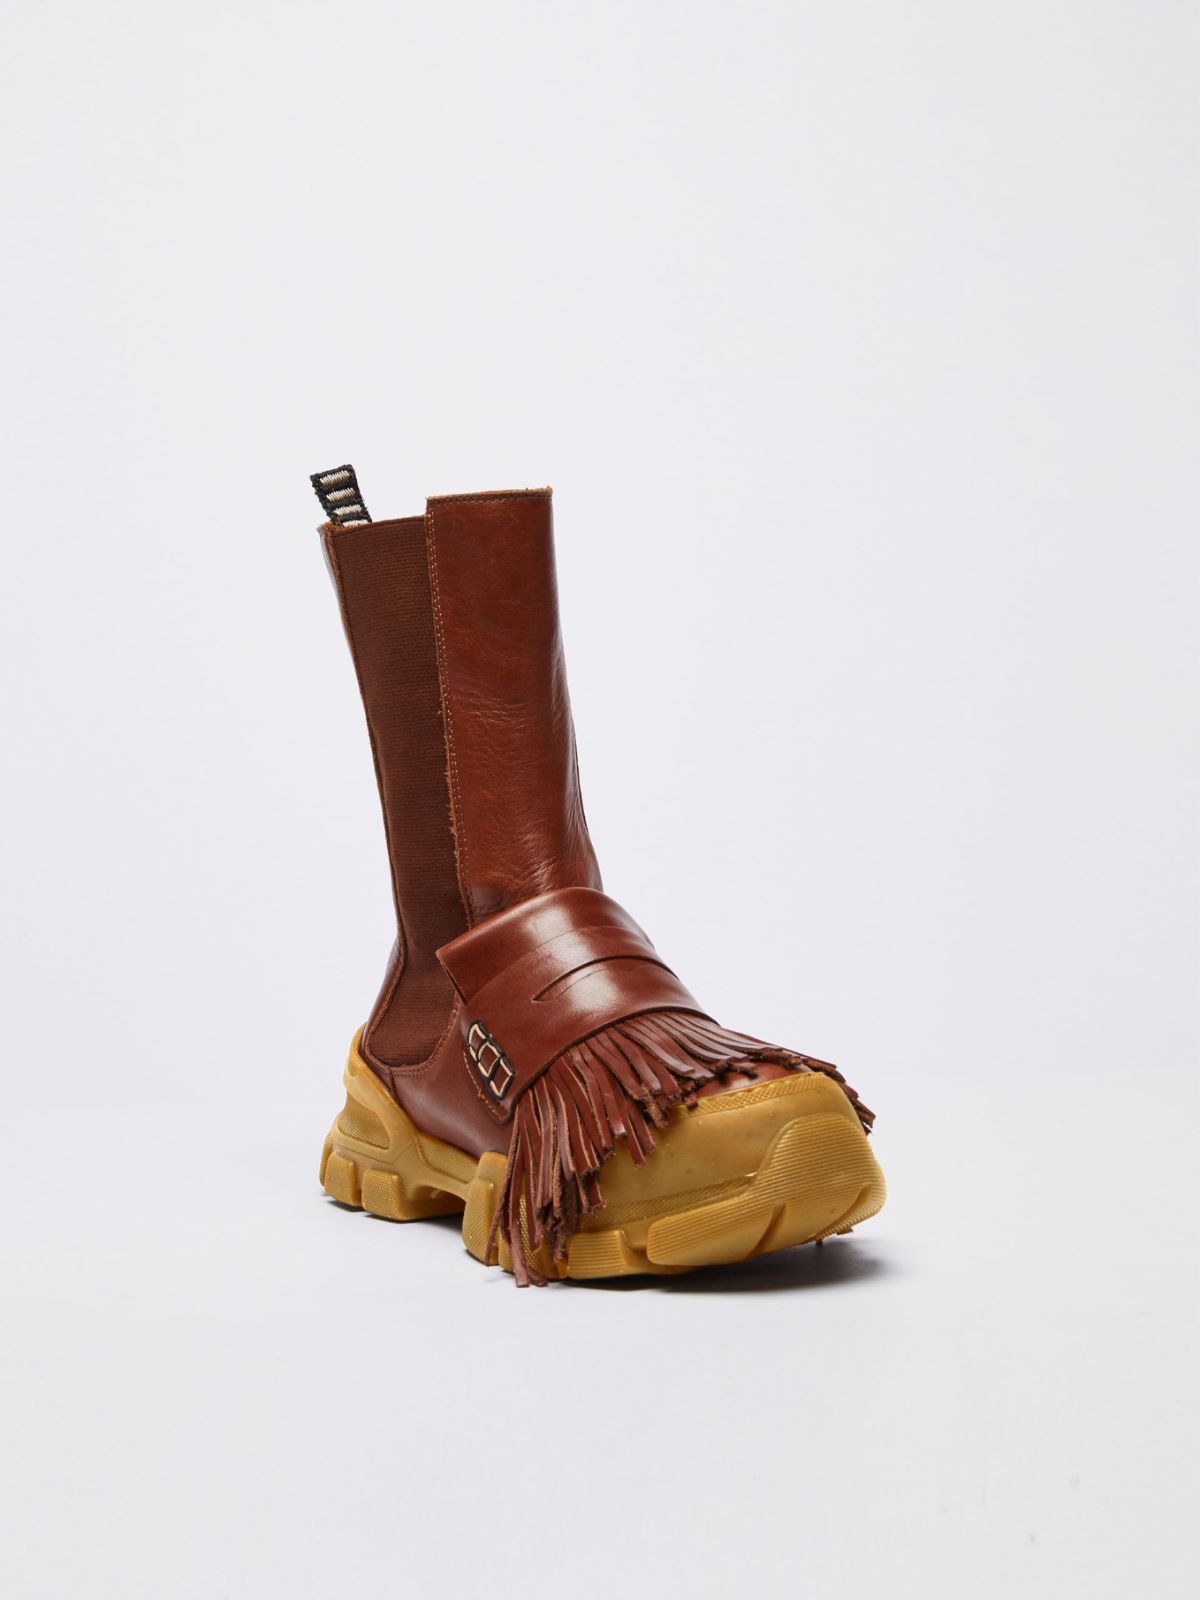 Smooth calfskin ankle boots - TOBACCO - Weekend Max Mara - 2